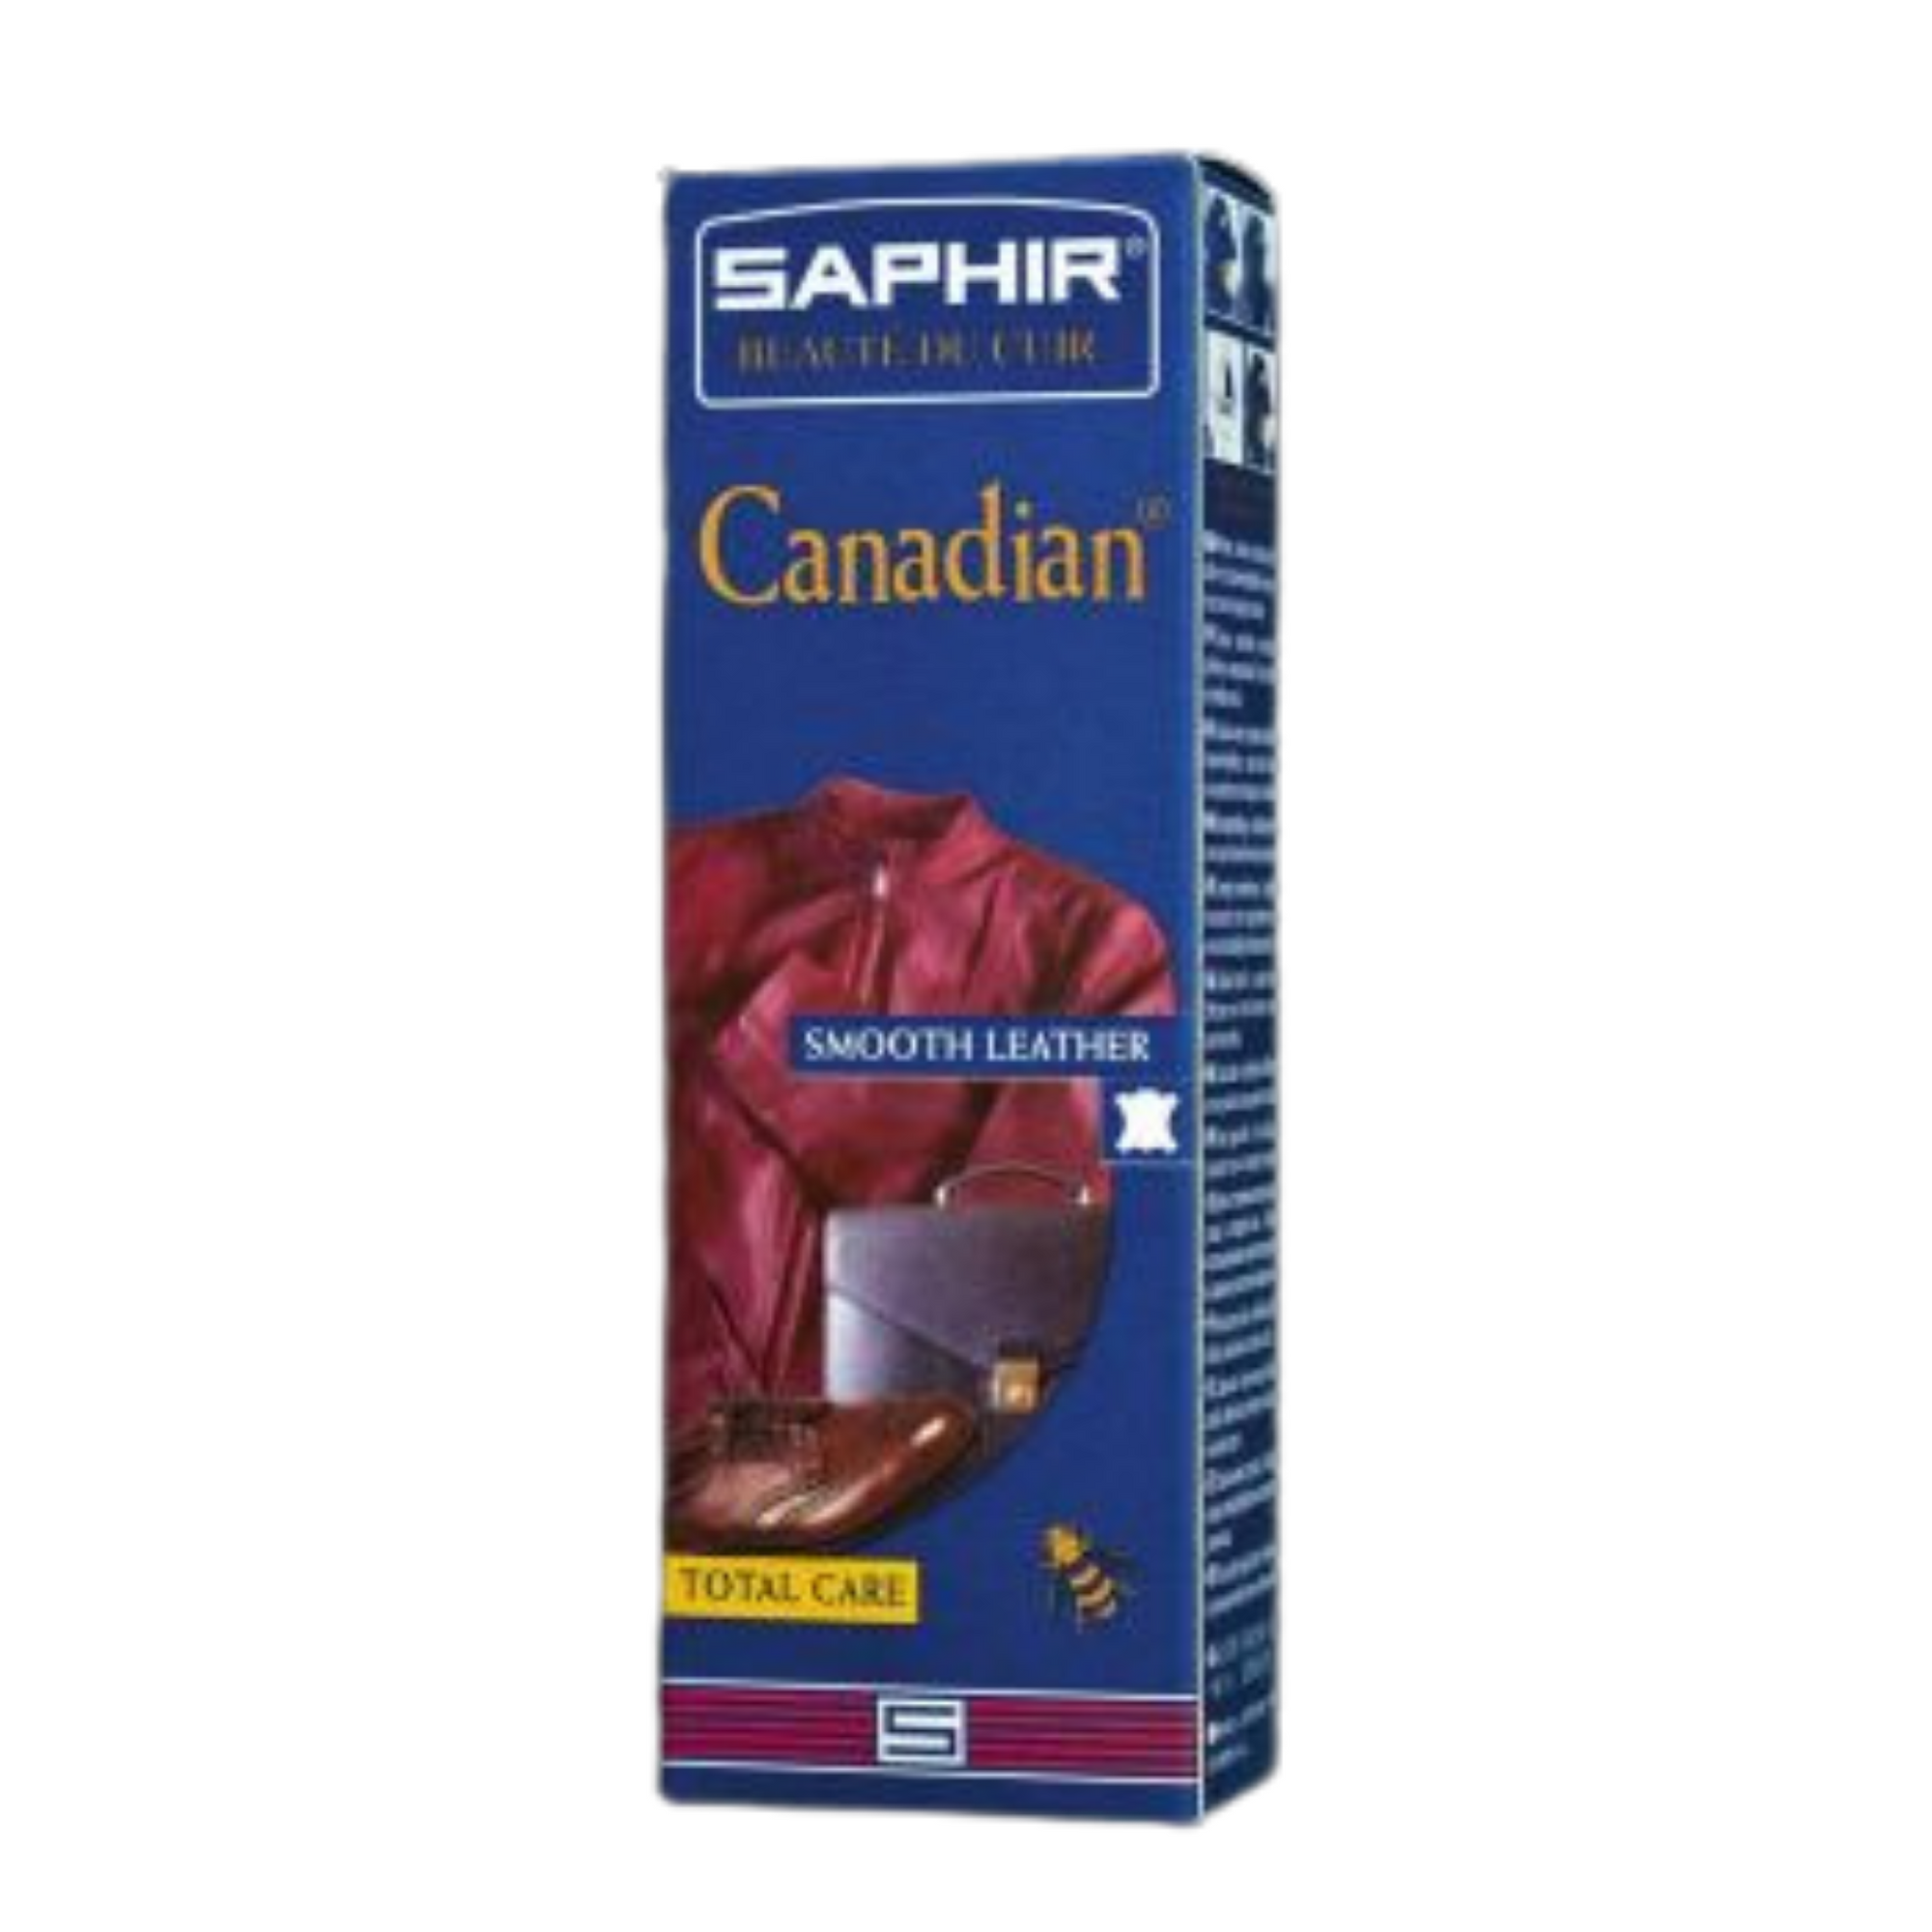 The Saphir Canadian cream is ideal for stain-removal, re-colouring, softening and waterproofing leather. Stocked by Little Lusso Australia